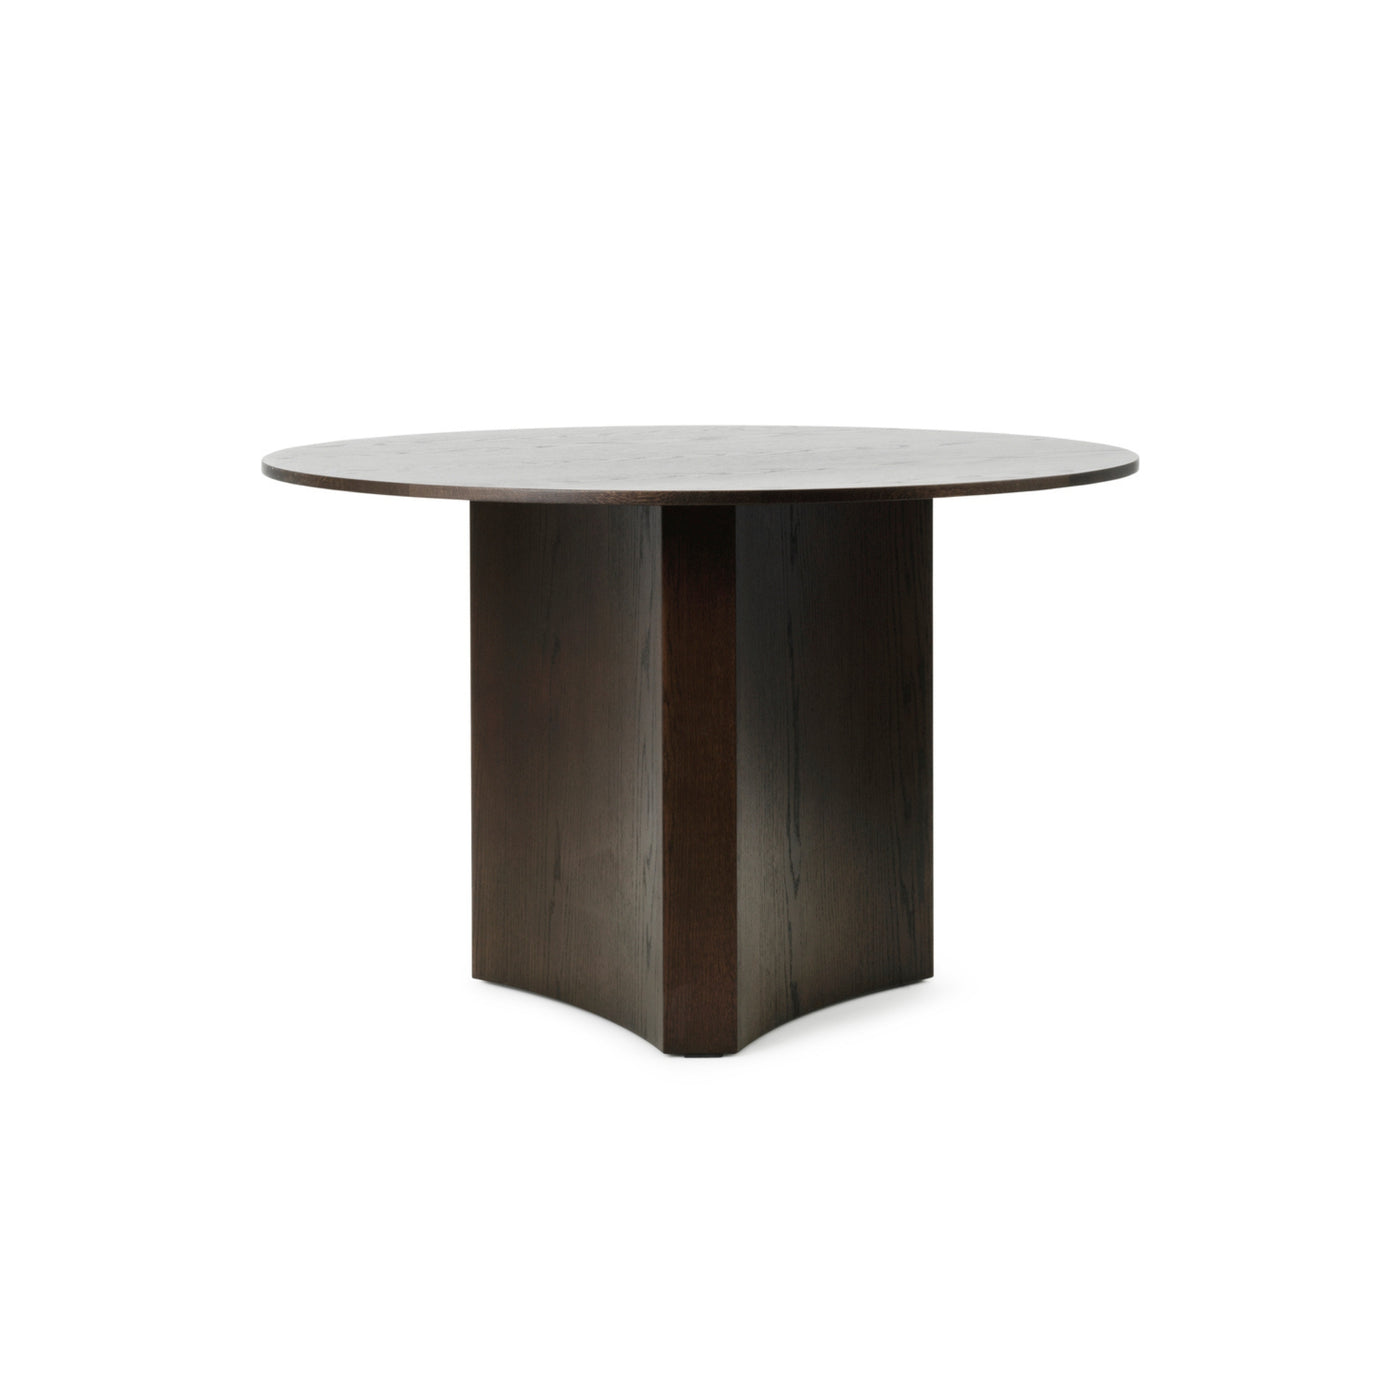 Normann Copenhagen Bue Table at someday designs. #colour_brown-stained-oak